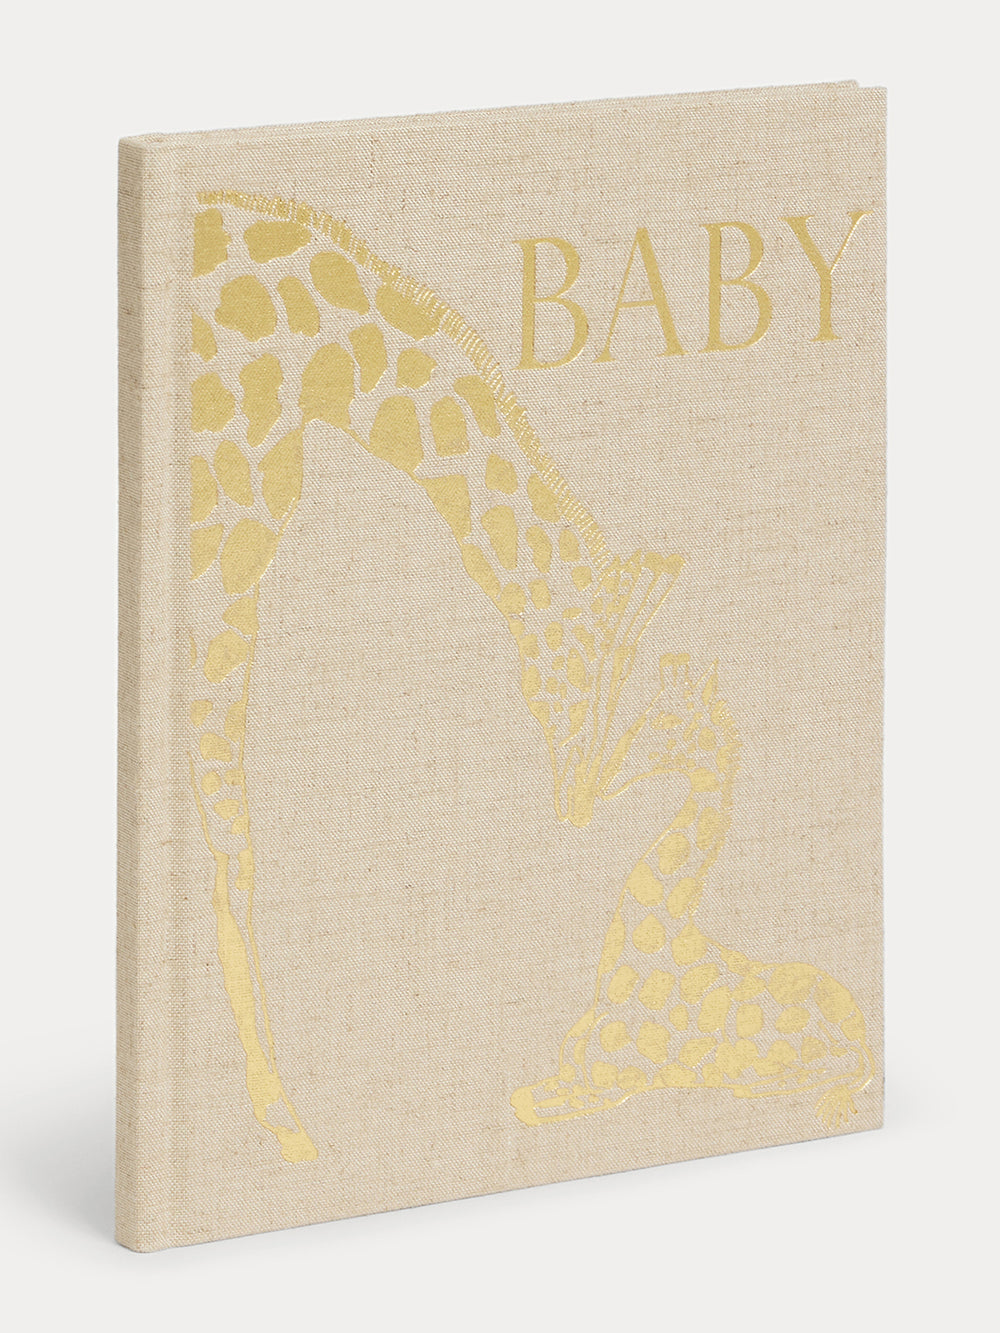 Album with Giraffe Cover for Baby alabaster white